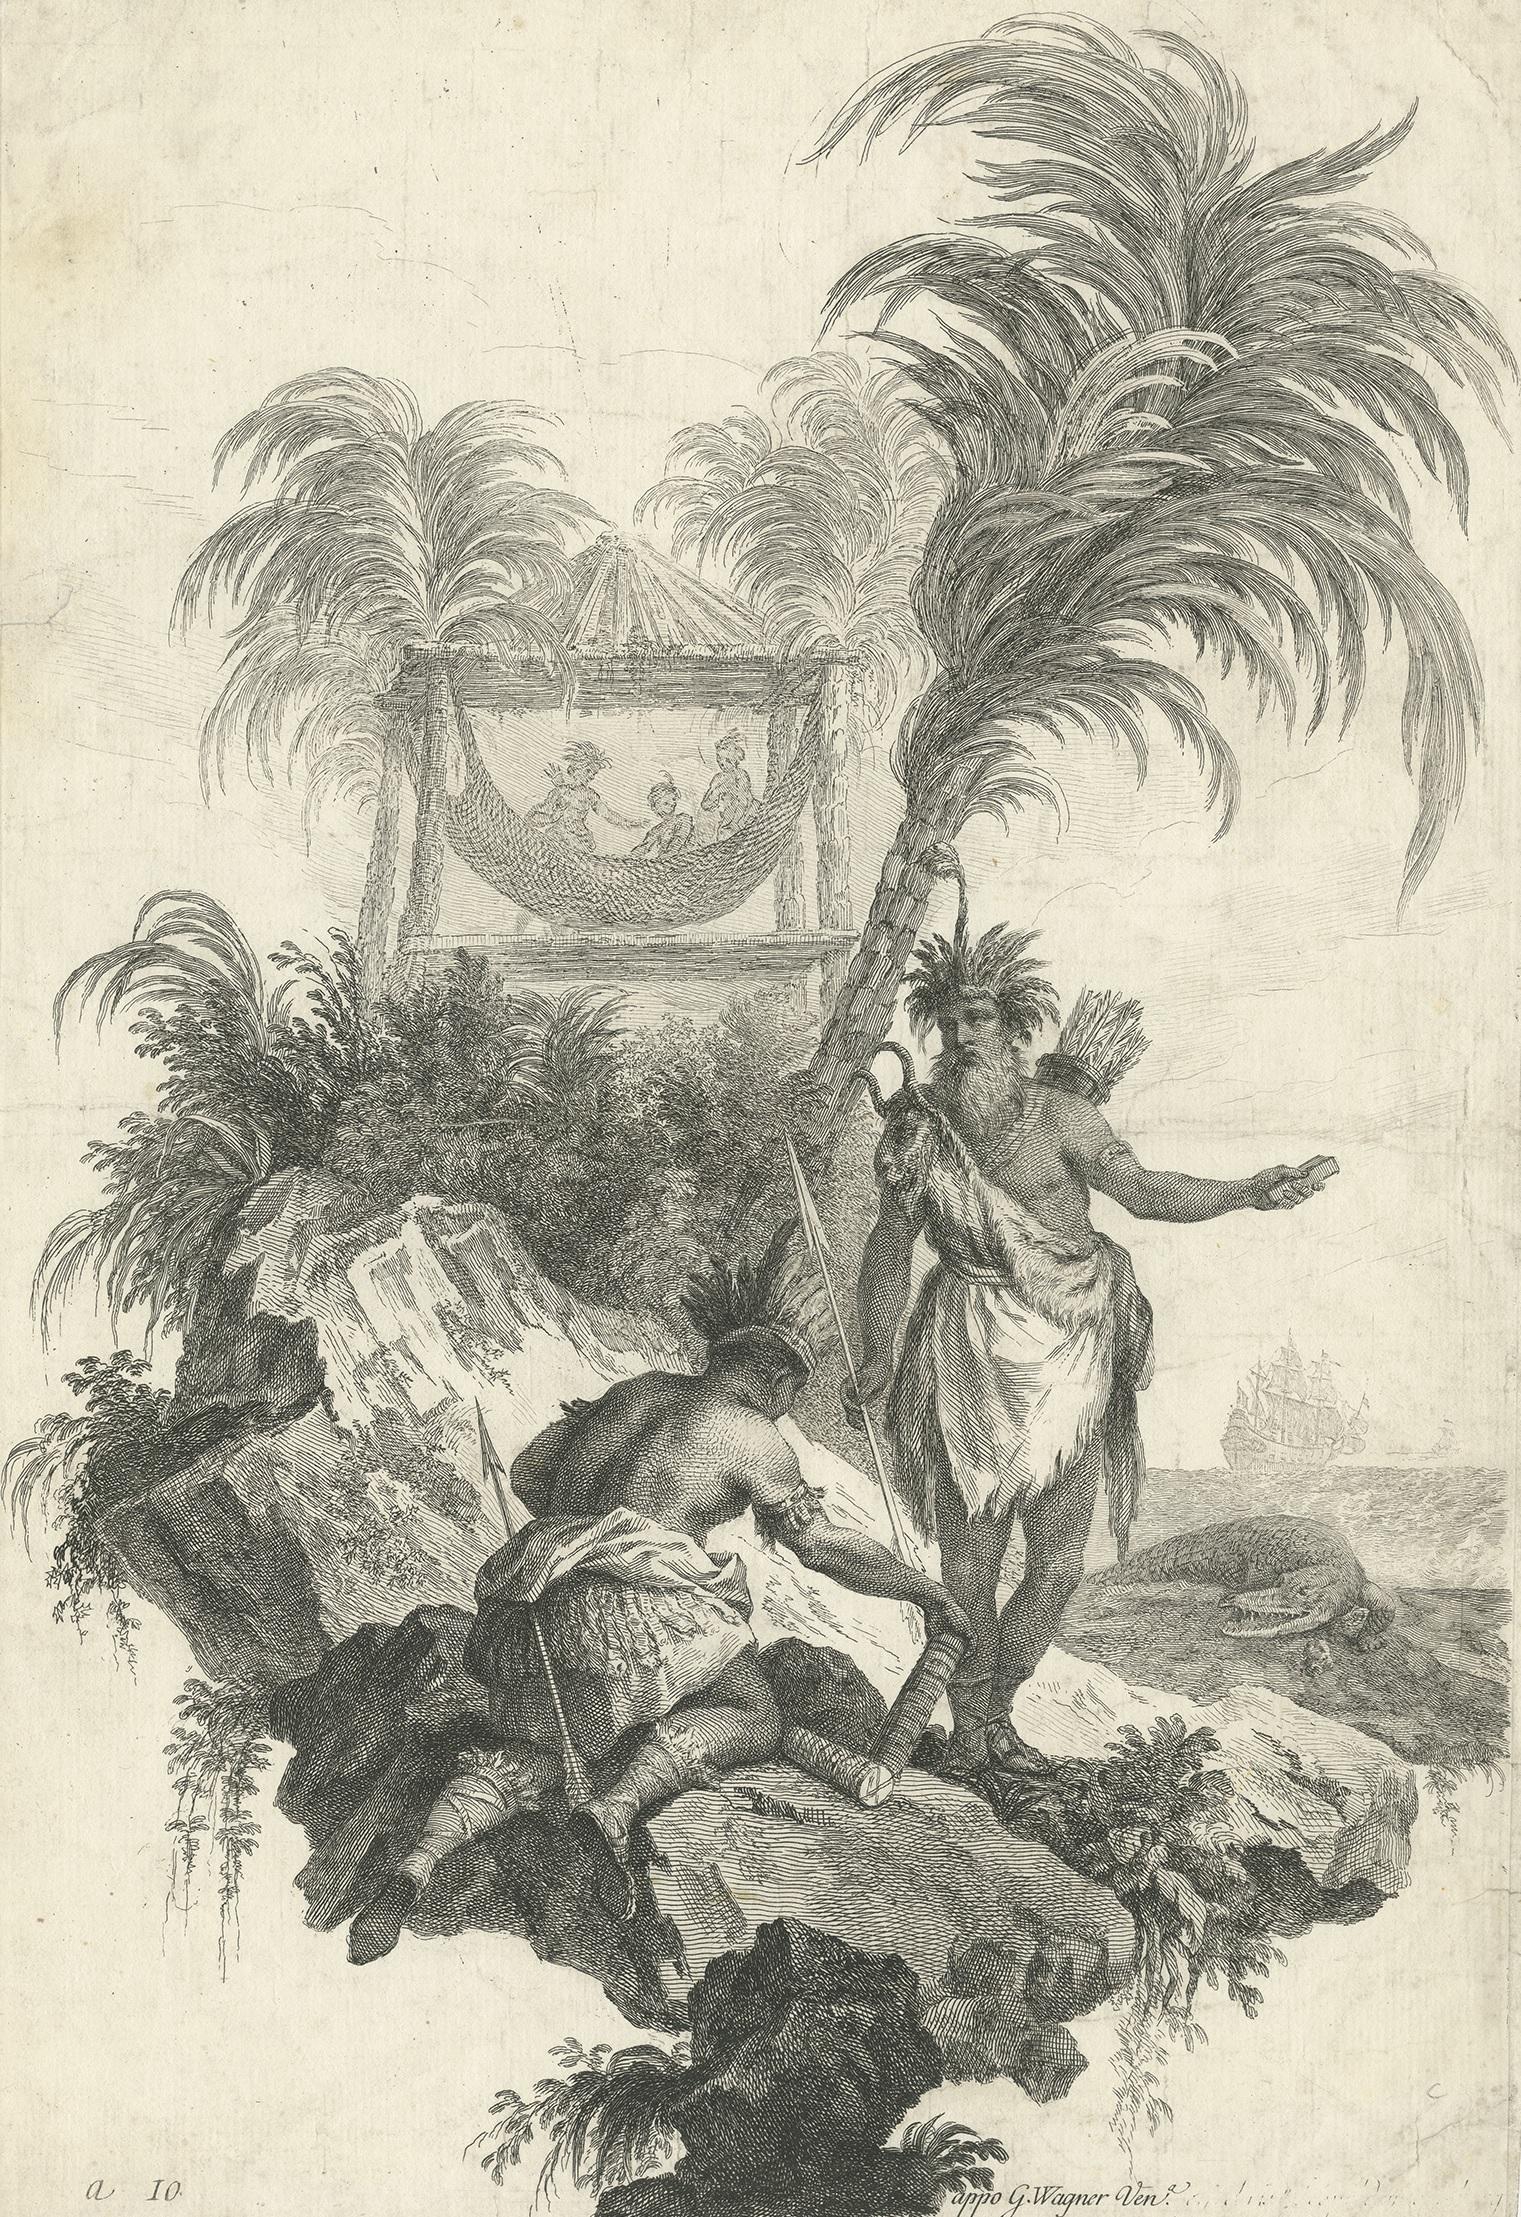 Antique print representing the continent 'Africa'. Shows two Africans and a crocodile. In the background three Africans near a hammock. This print is made after Jacopo Amigoni, who published a series of prints representing the various continents and